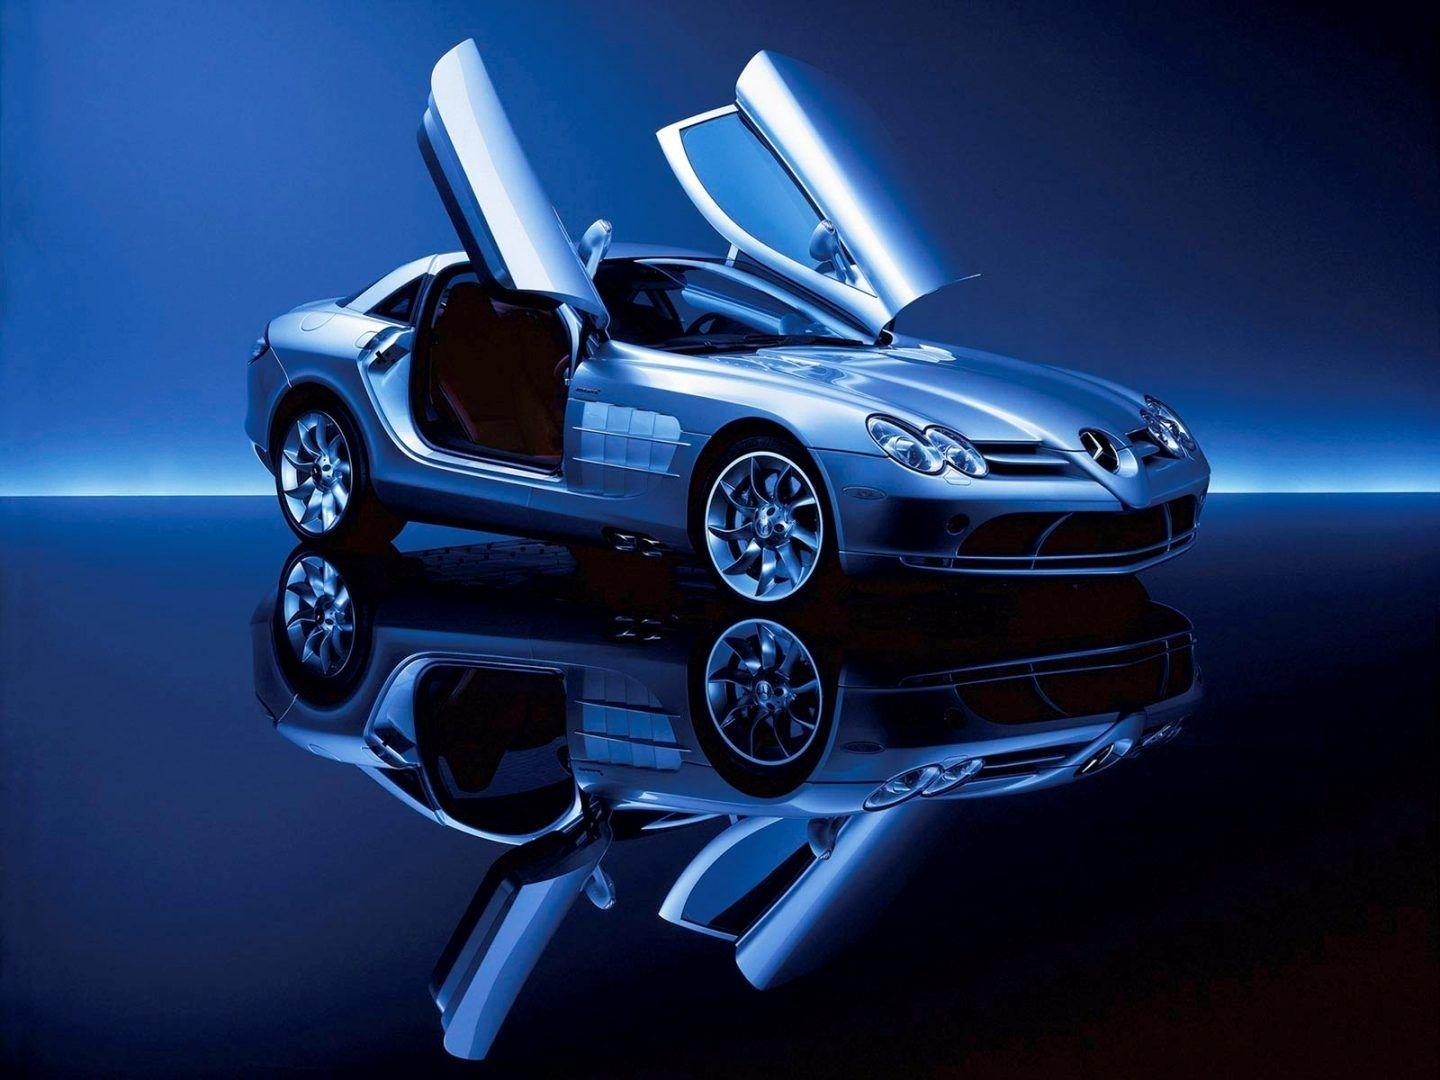 Stylish Cars Wallpapers Wallpaper Cave